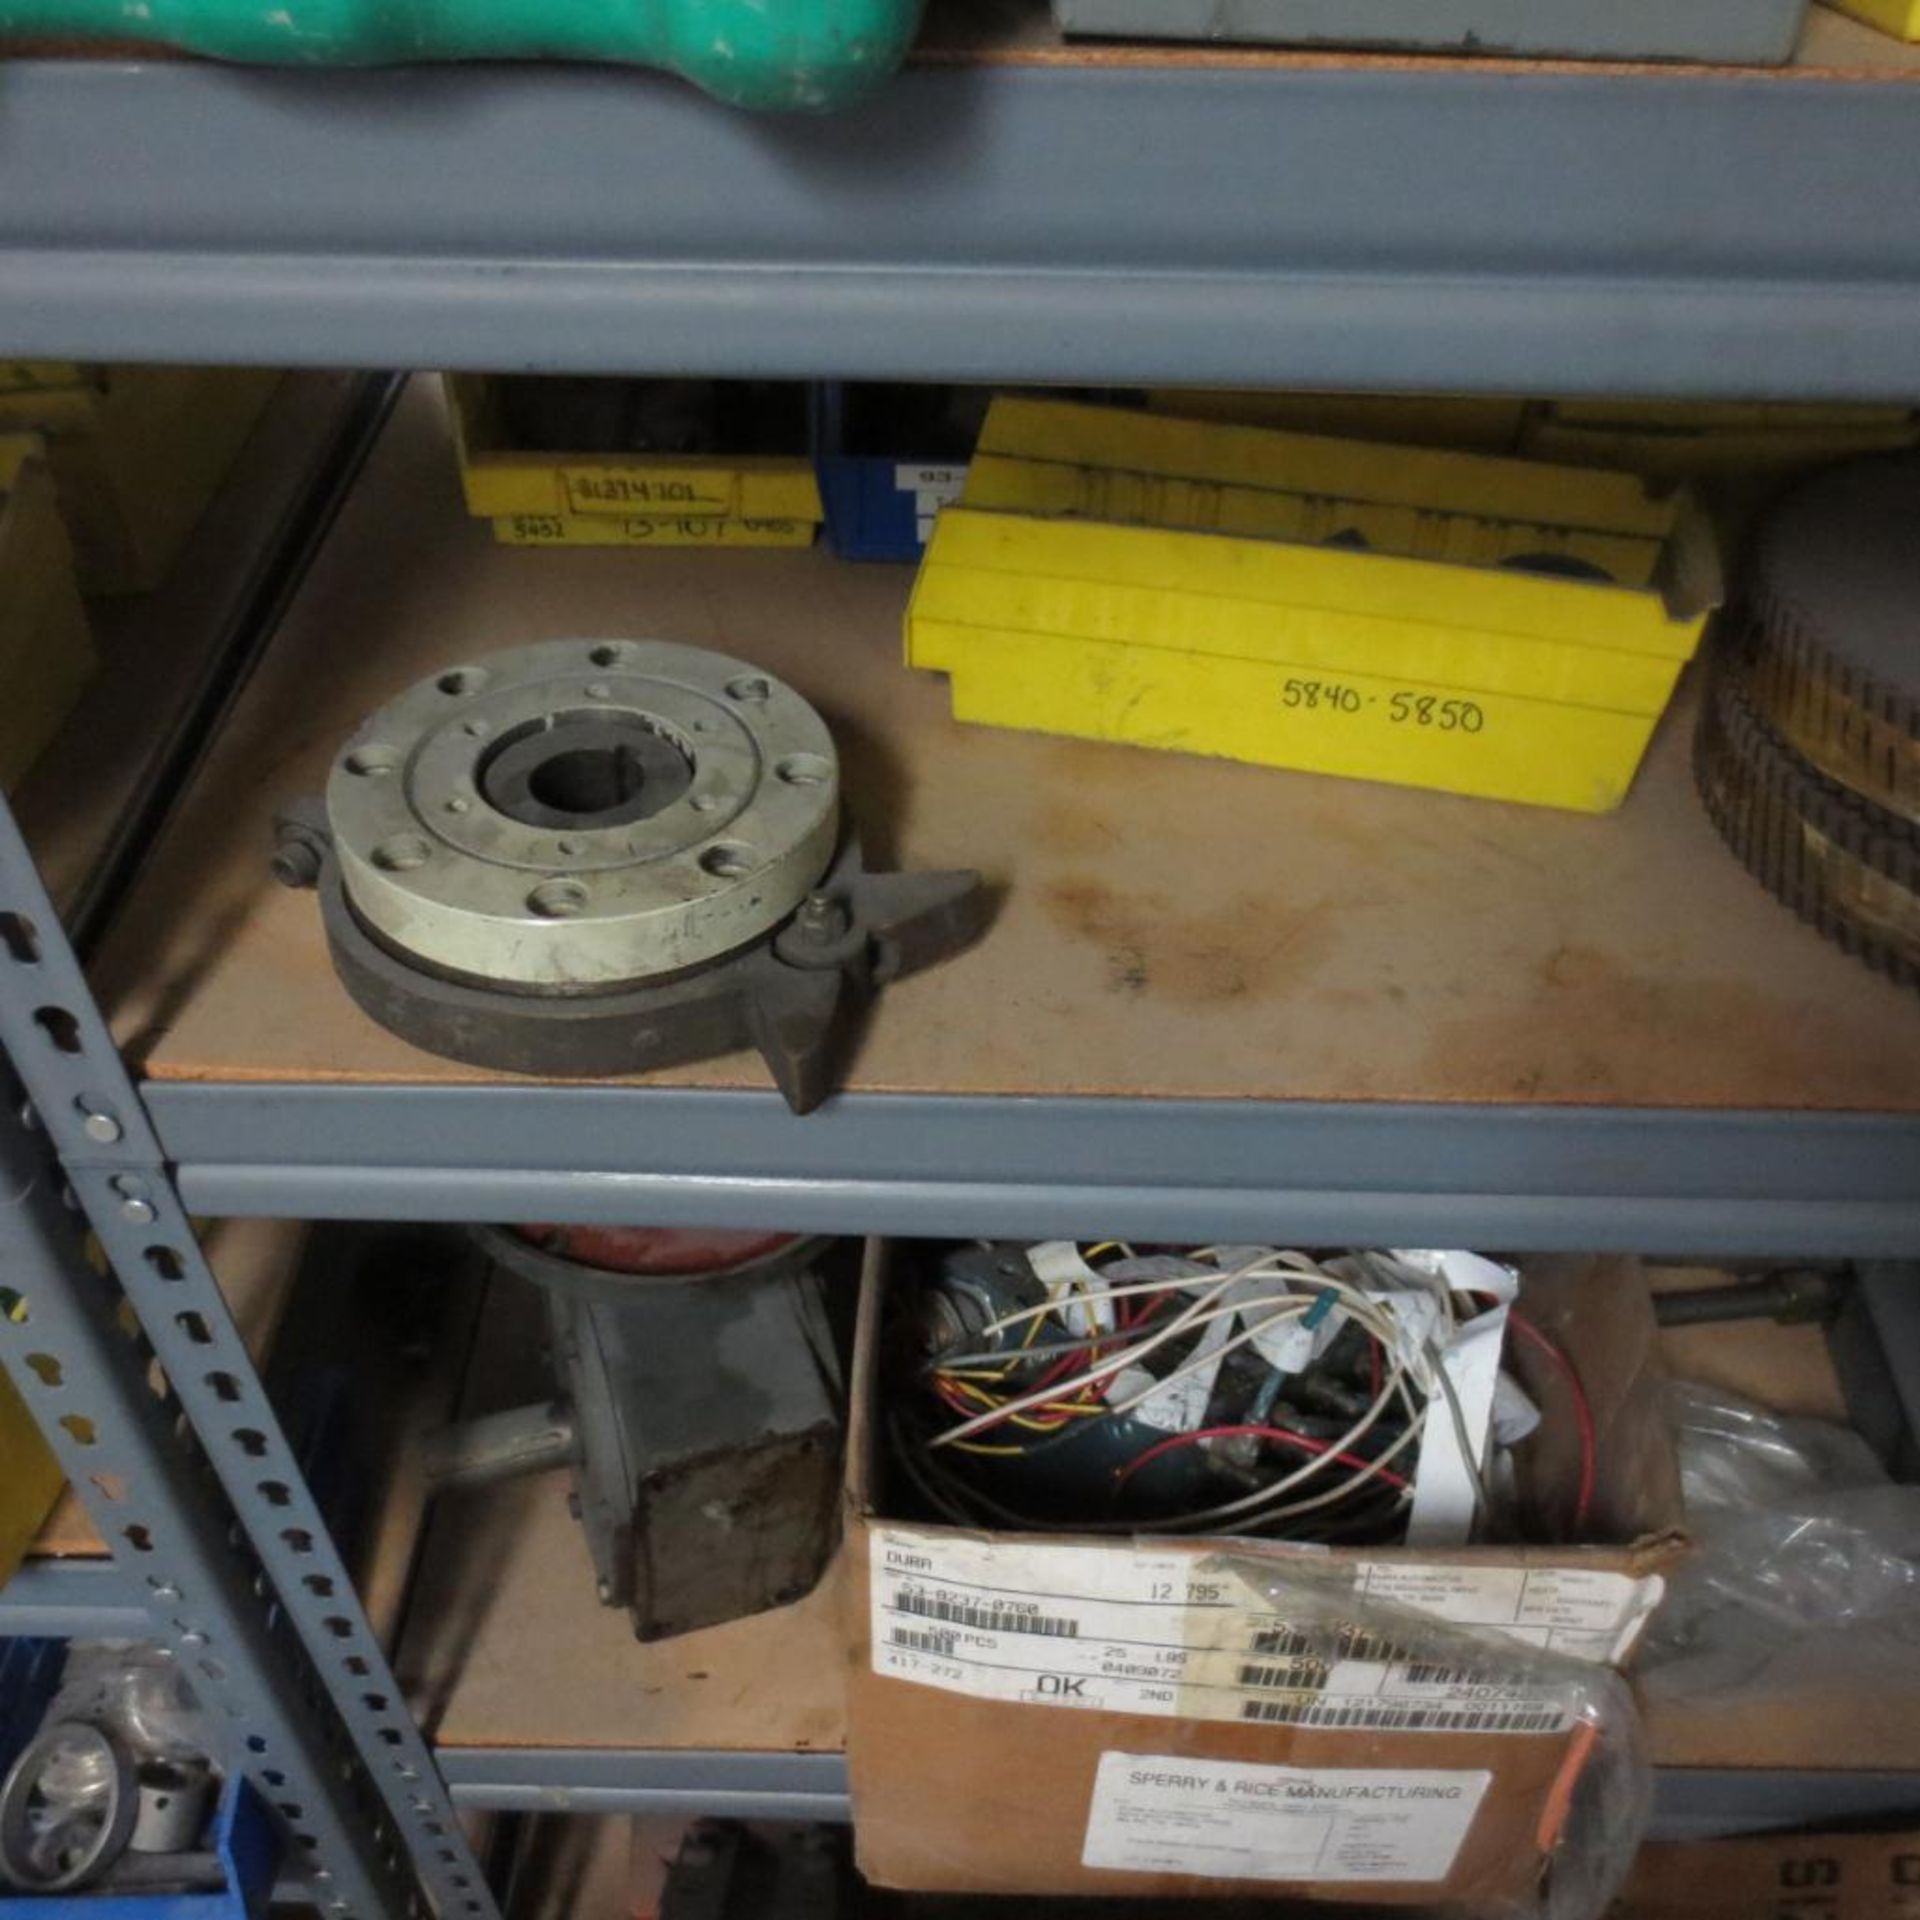 Parts Room Consisting of Gears, Electric Boards, Motors, AB Item, Filters, Motor Starters and Parts - Image 13 of 42